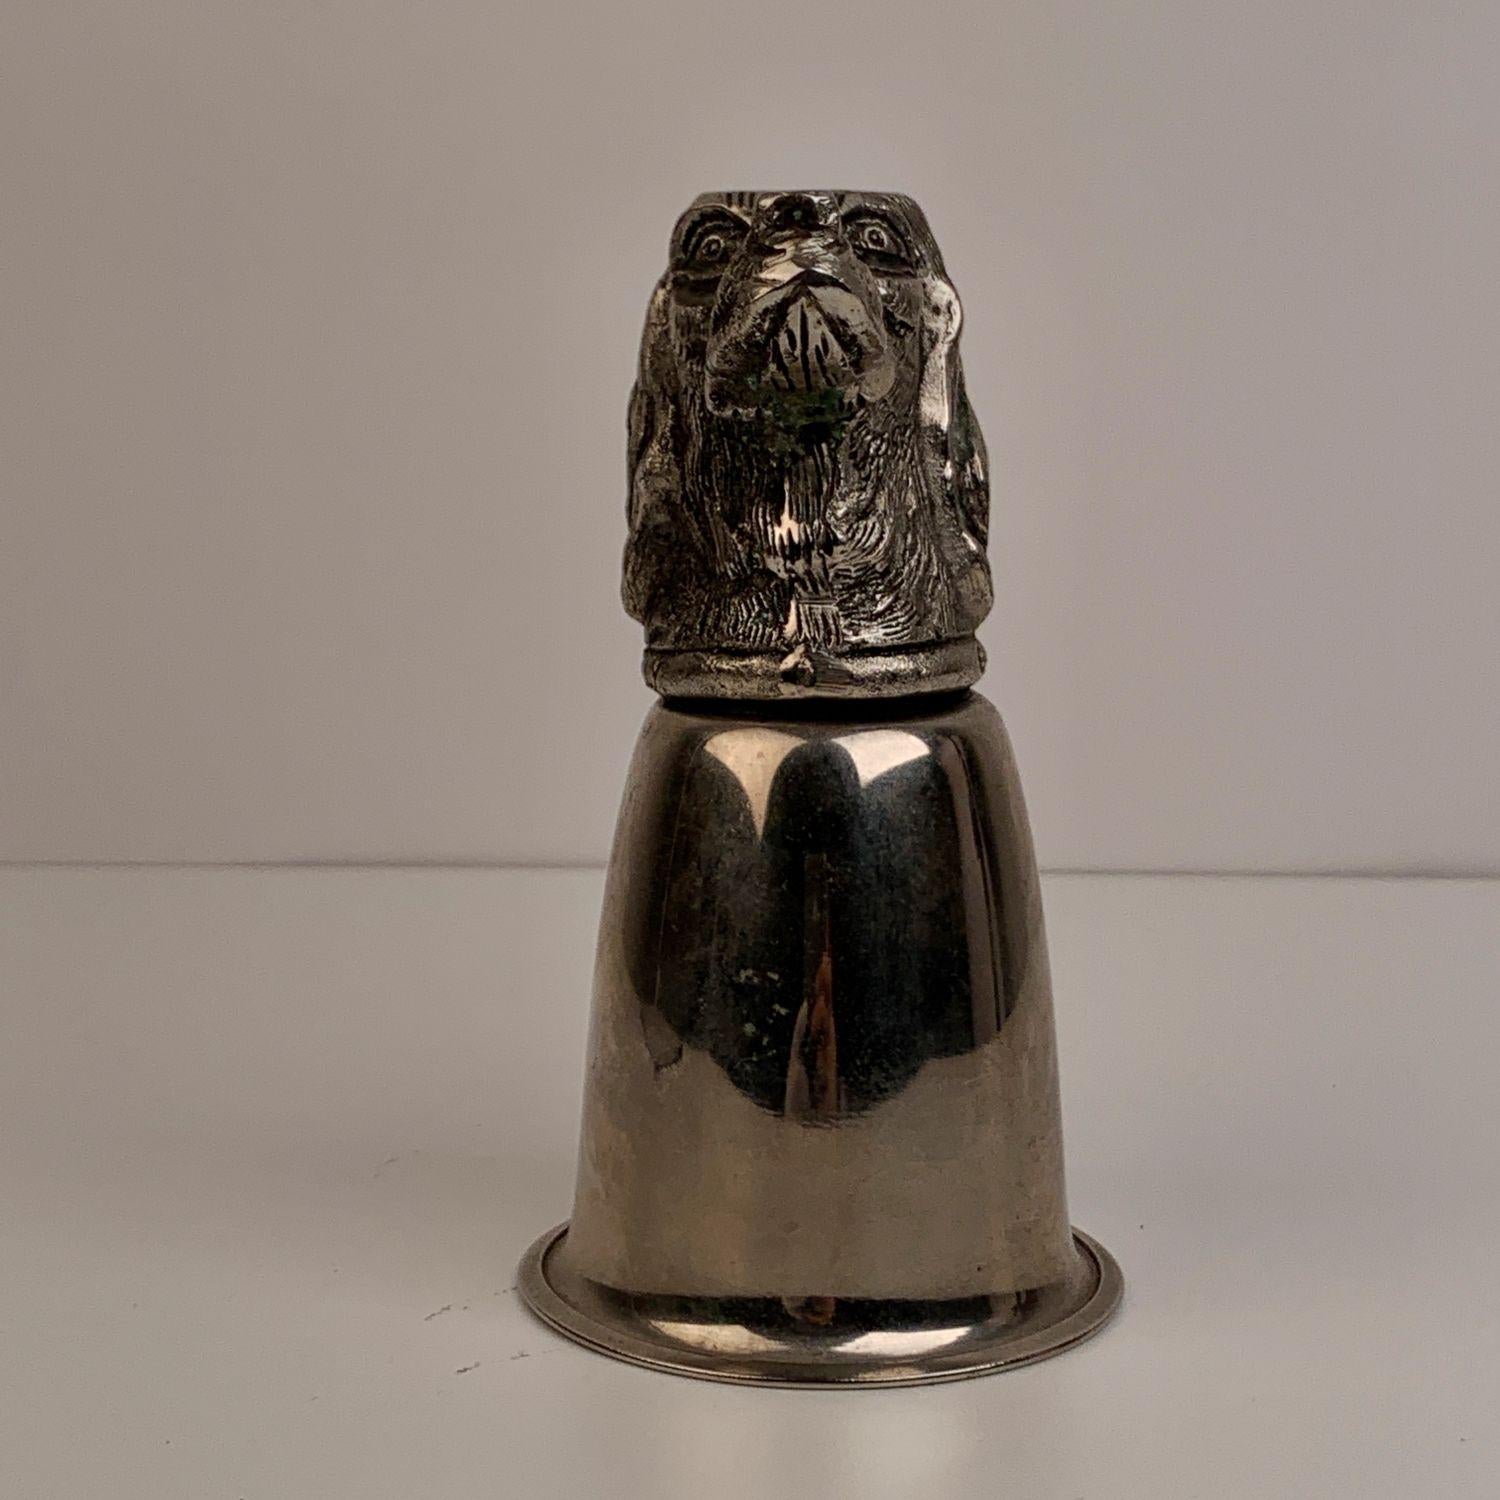 Vintage Gucci dog's head cup from the 70s. Silver plated cup and pewter head. It can sit safely either way up or down. Marked GUCCI ITALY. Height: 5.5 inches - 14 cm. Cup's diameter: 3 inches - 7,6 cm

Details

MATERIAL: Metal

COLOR: Silver

MODEL: